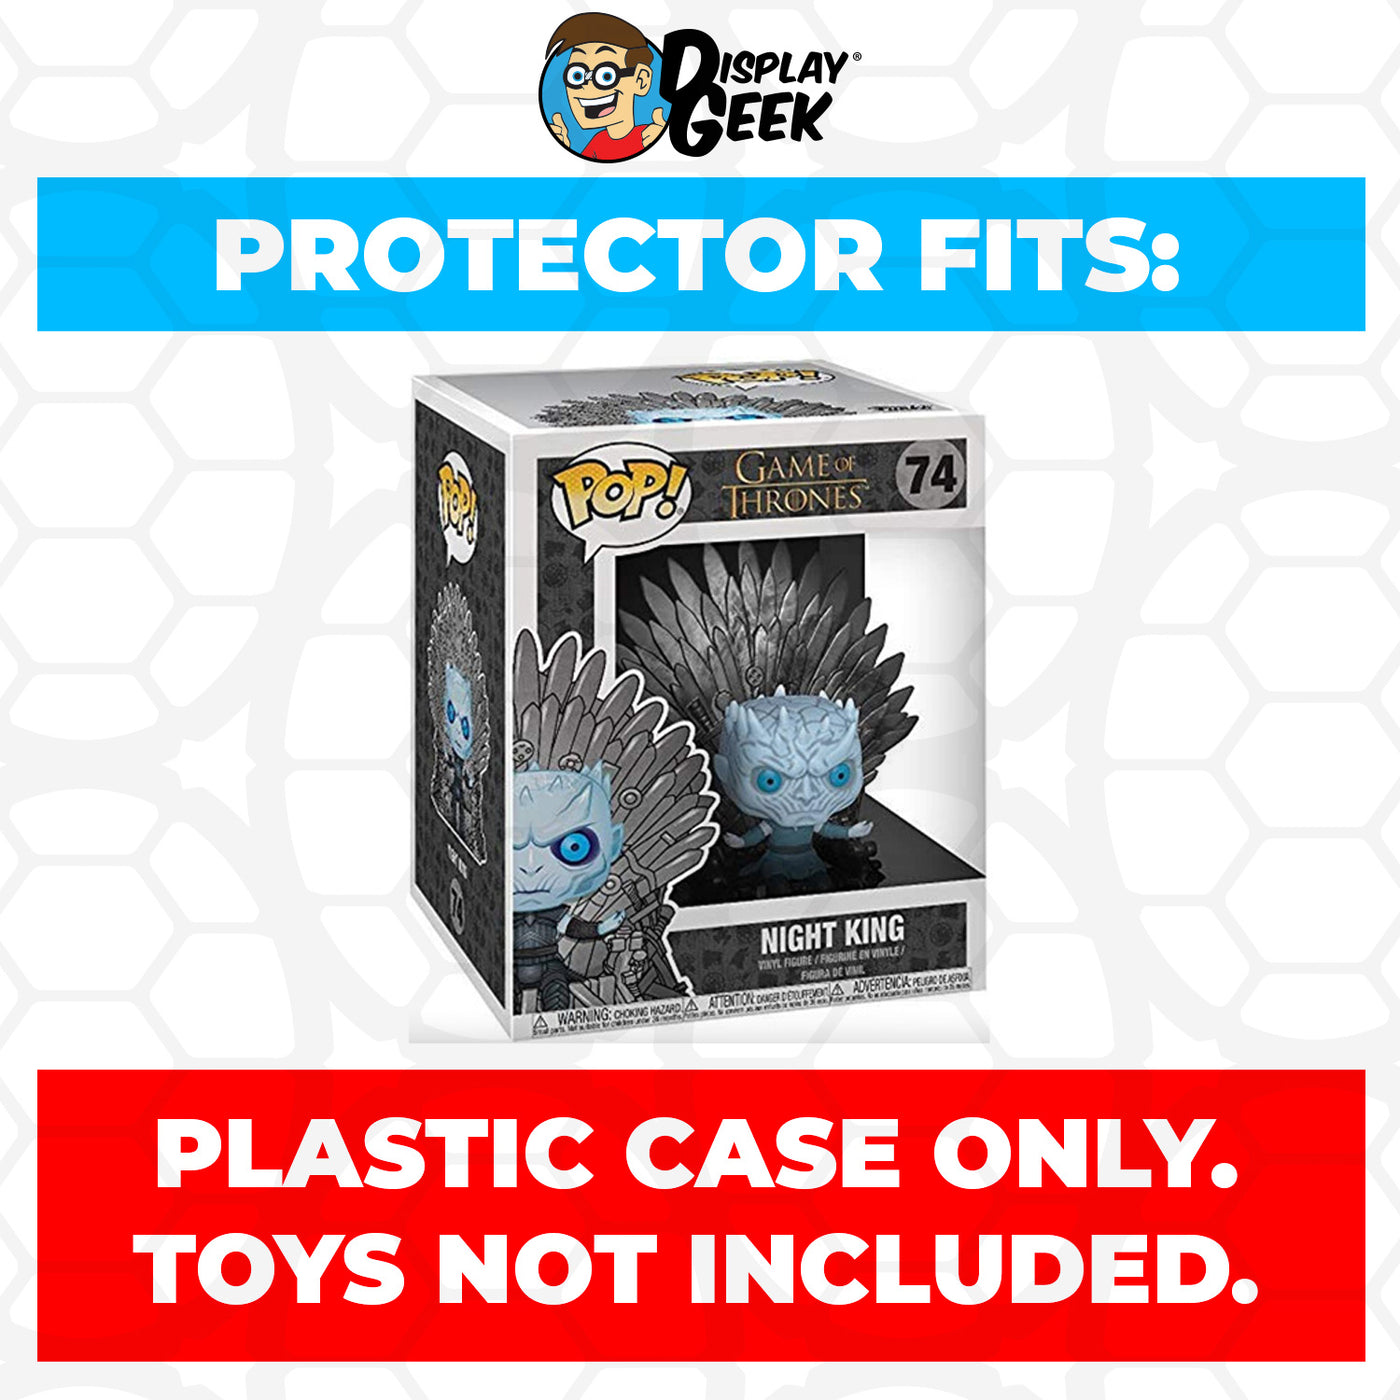 Pop Protector for 6 inch Night King Iron Throne #74 Super Funko Pop on The Protector Guide App by Display Geek